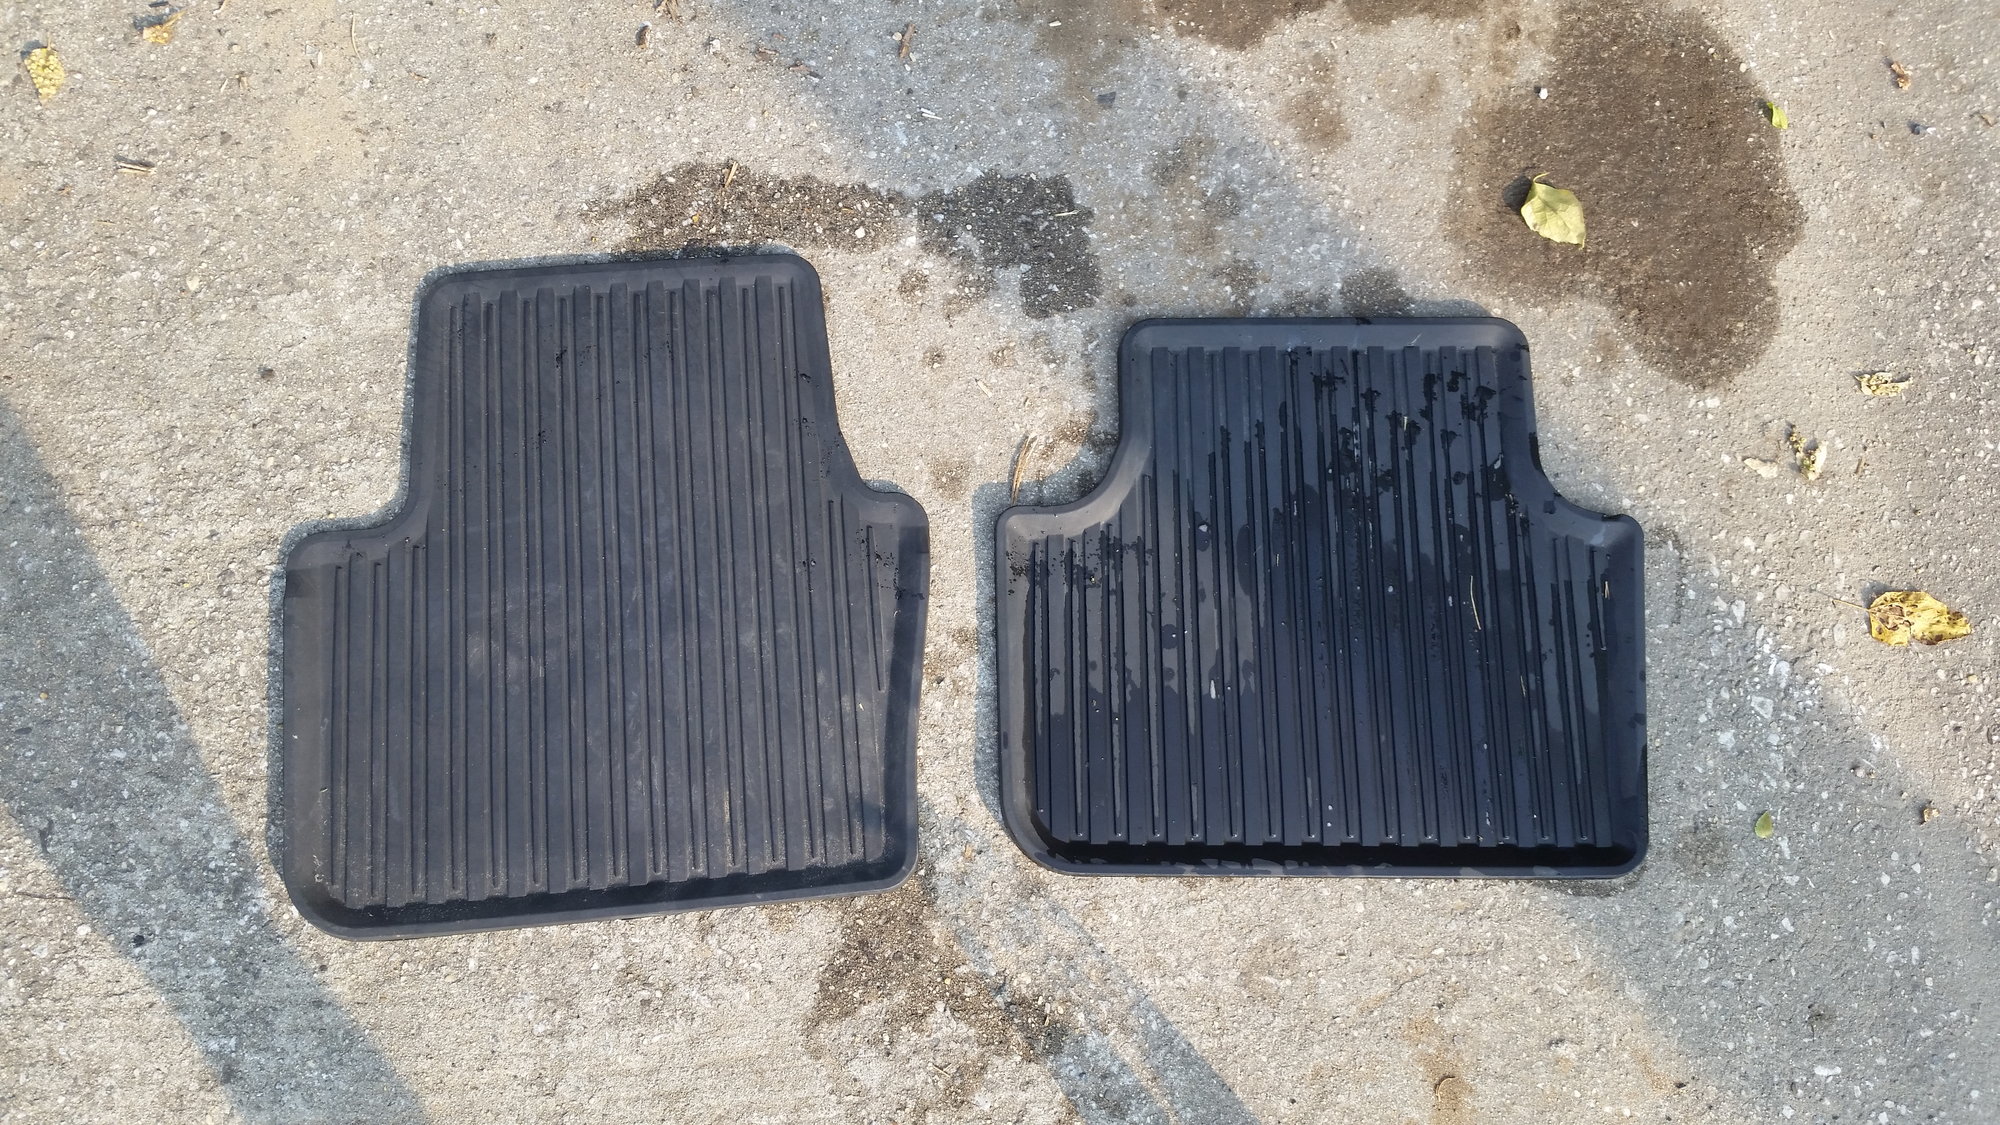 CLOSED oem 0408 tsx all weather floor mats (black) will also fit 0408 TL AcuraZine Acura